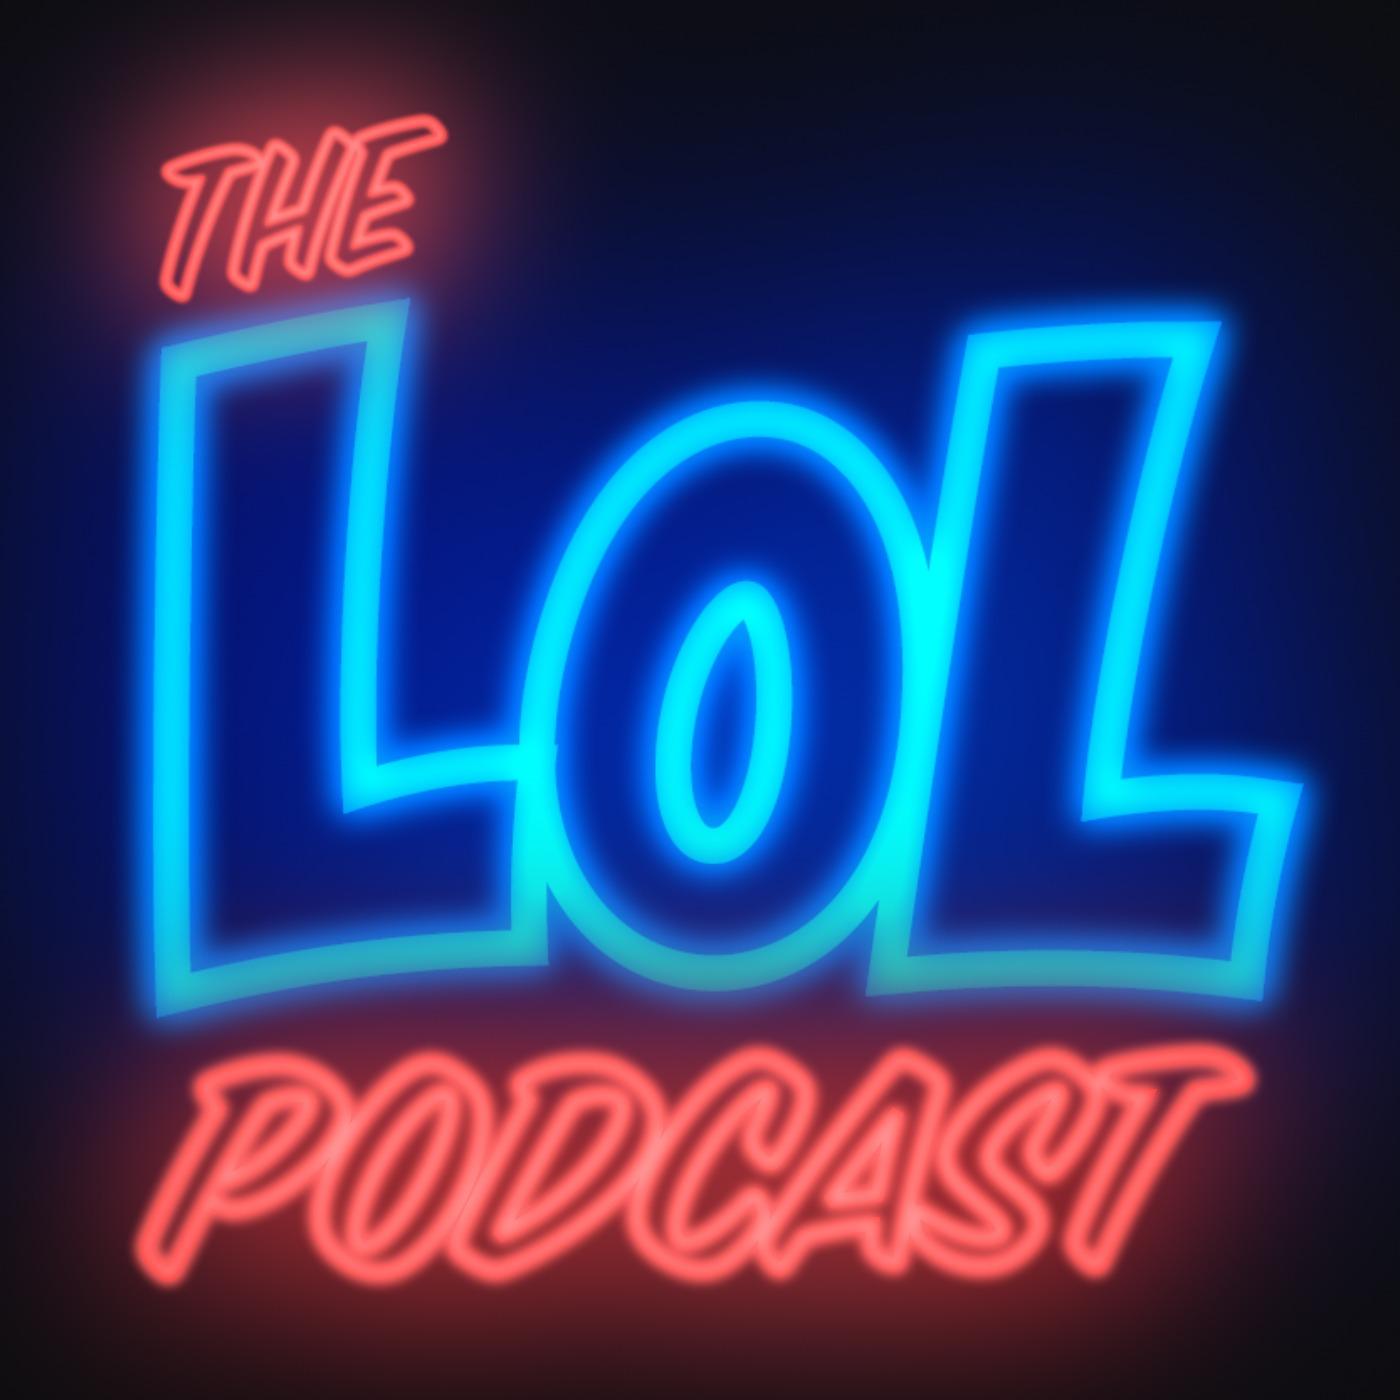 The LOL Podcast